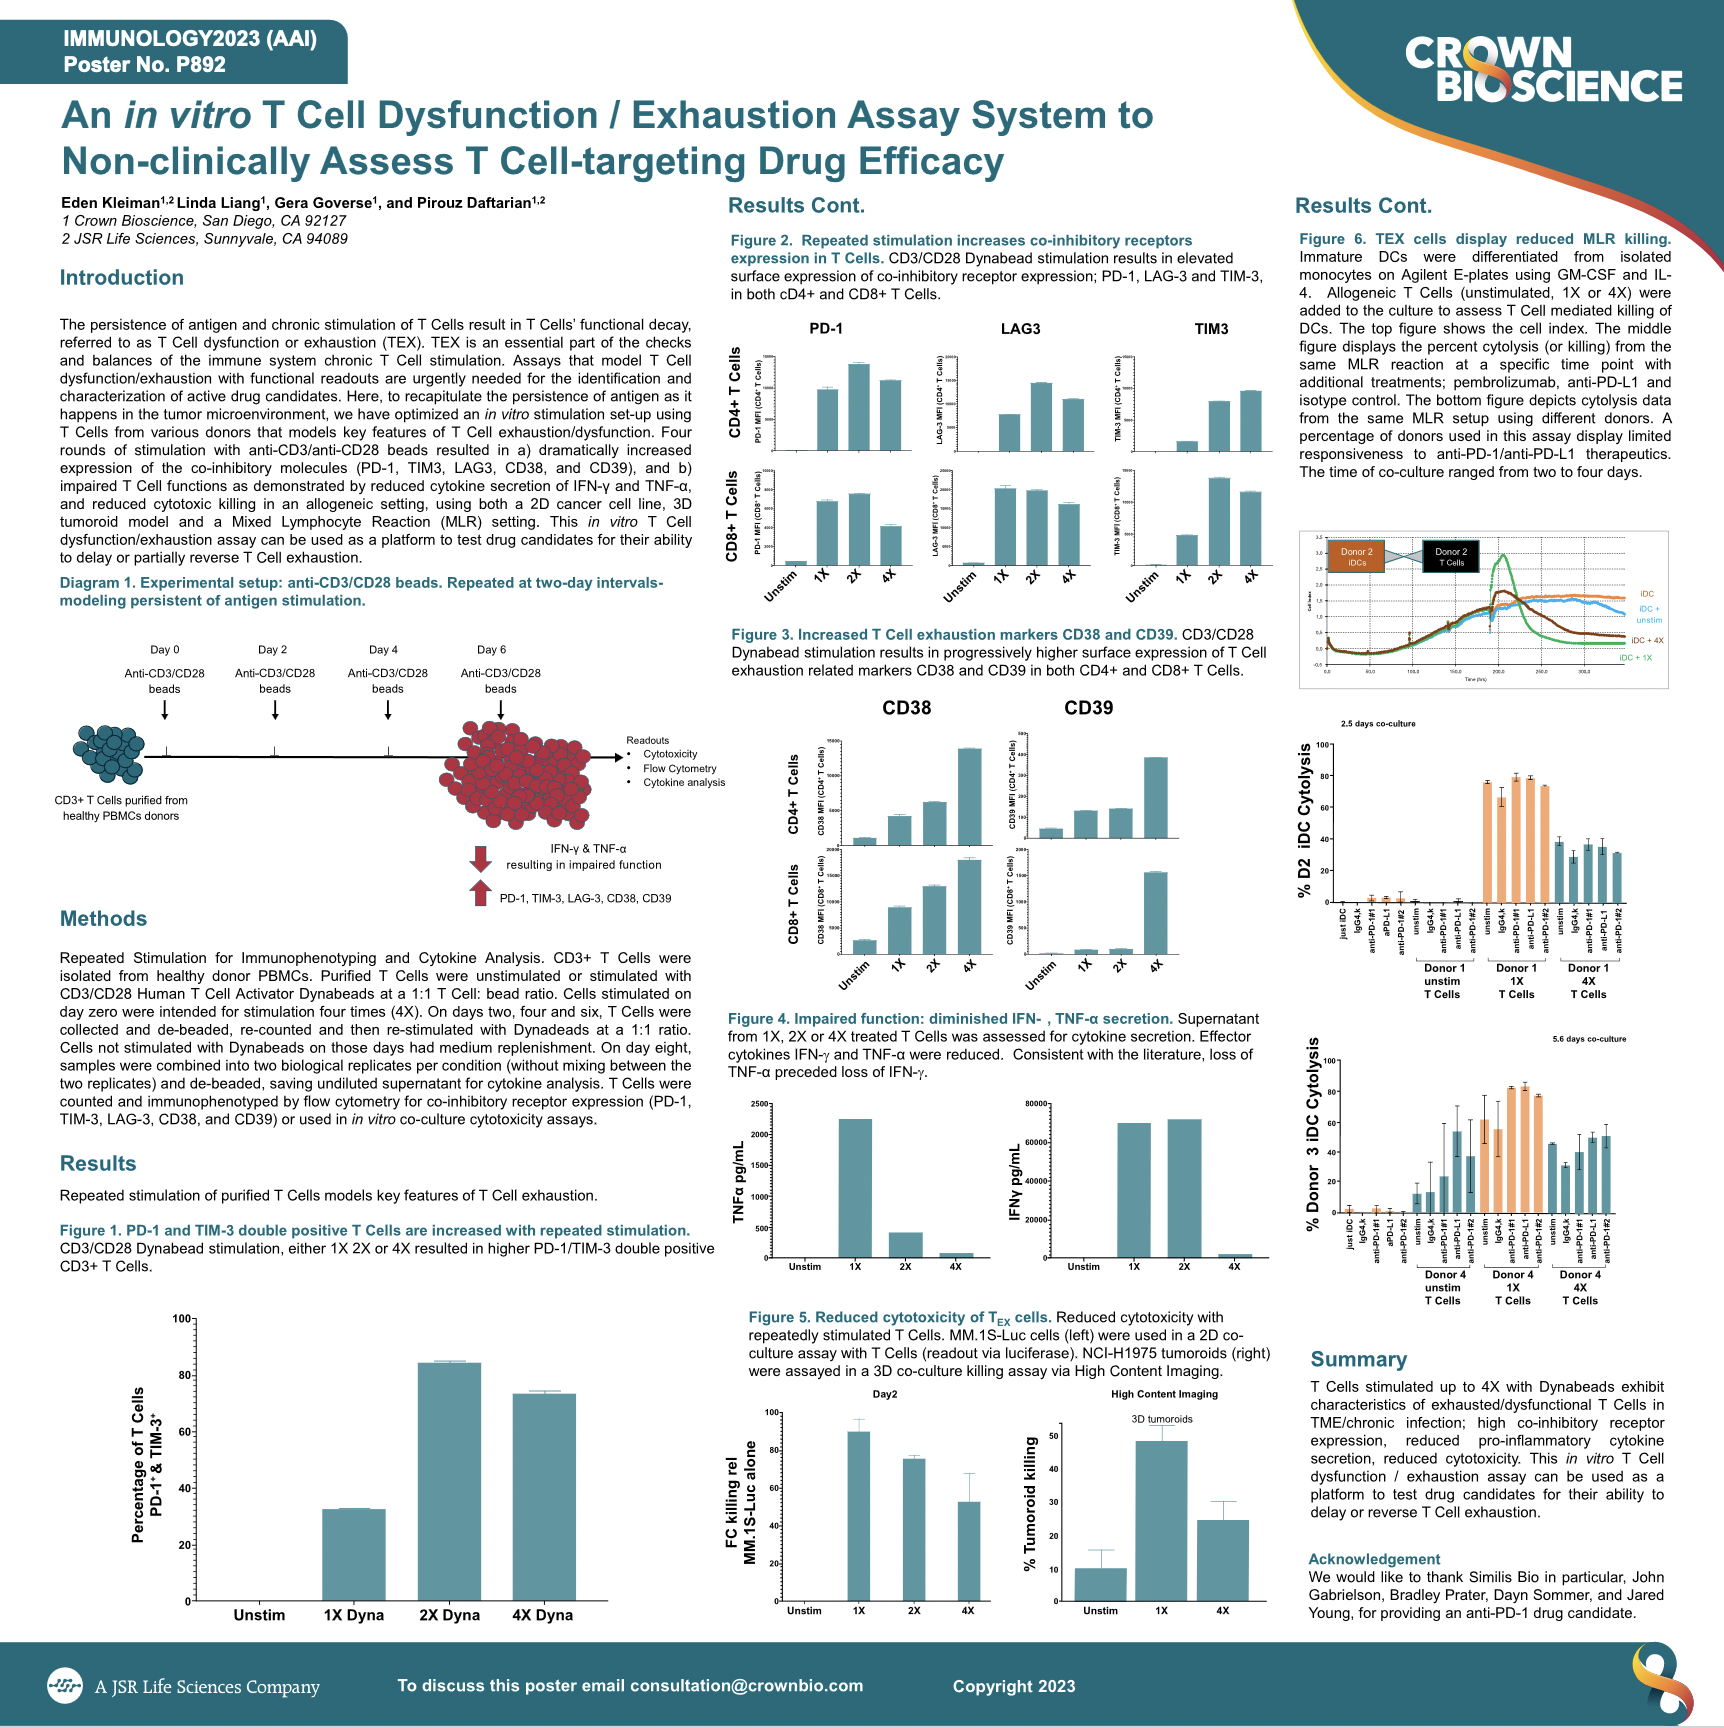 AAI 2023 Poster P892: An in vitro T Cell Dysfunction / Exhaustion Assay System to Non-clinically Assess T Cell-targeting Drug Efficacy